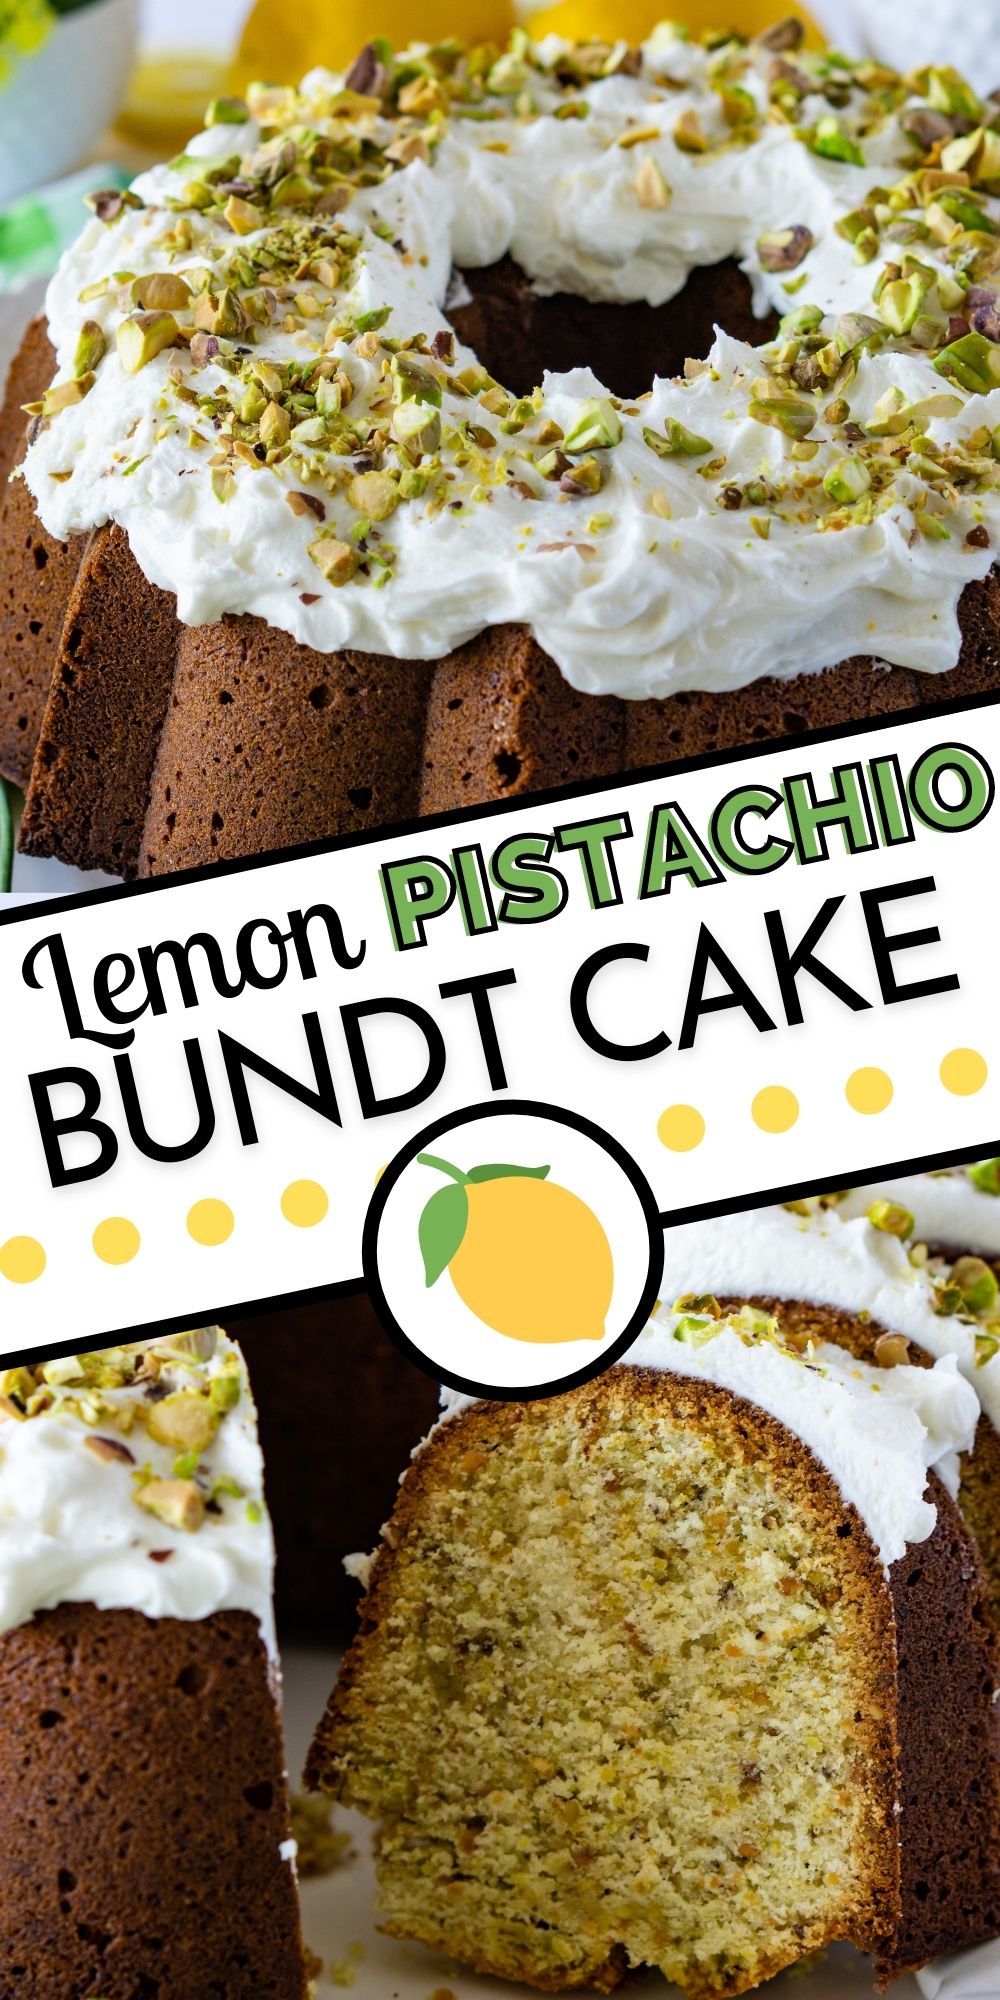 This Lemon Pistachio Bundt Cake recipe is made completely from scratch. It’s dense, buttery, and packed with pistachios and zesty lemon flavor. via @foodfolksandfun